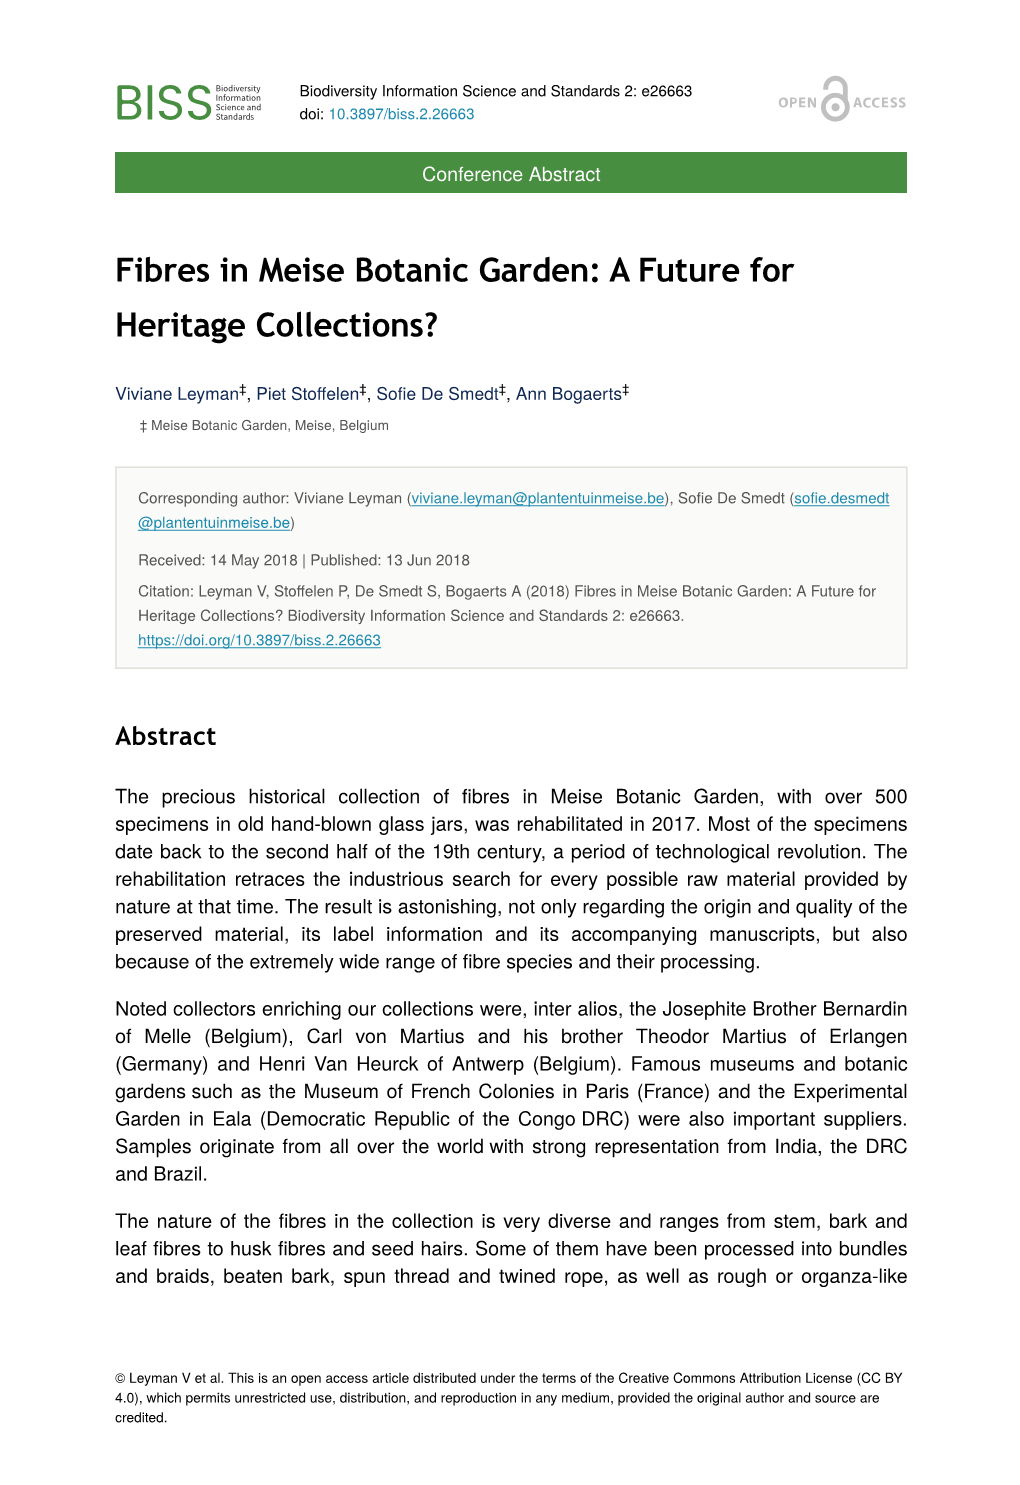 Fibres in Meise Botanic Garden: a Future for Heritage Collections?